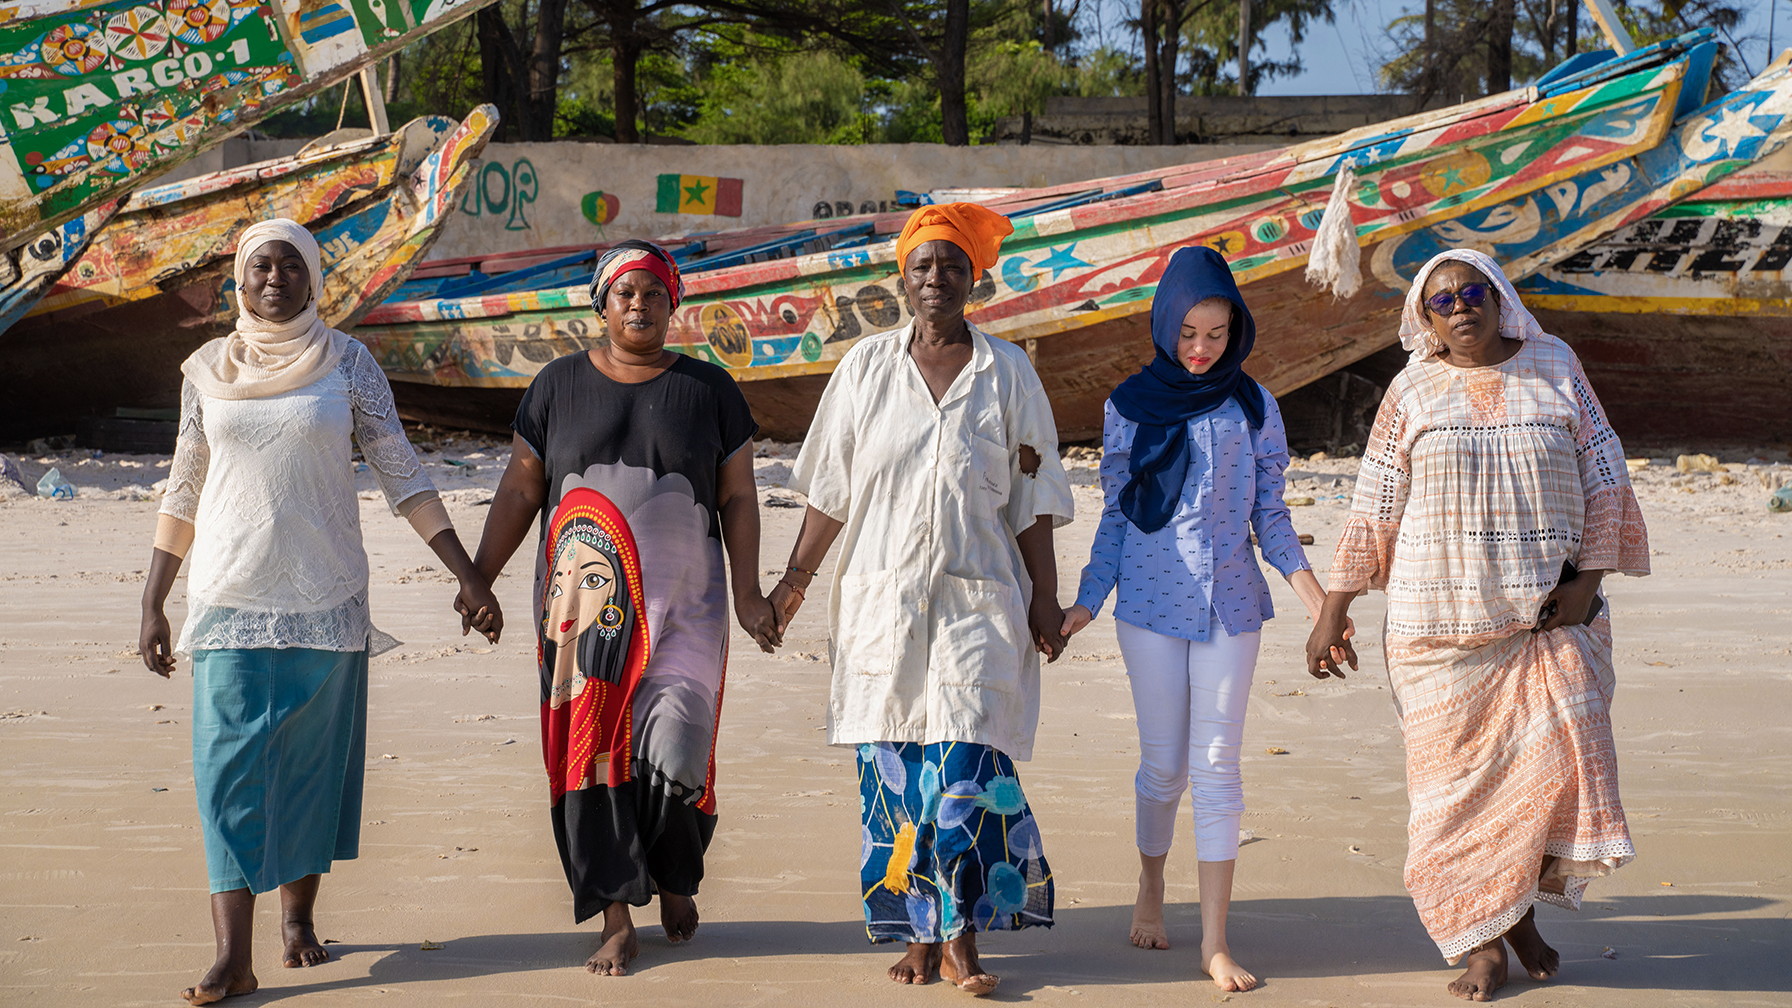 5 women walk hand in hand on the beach with colorful boats in the background